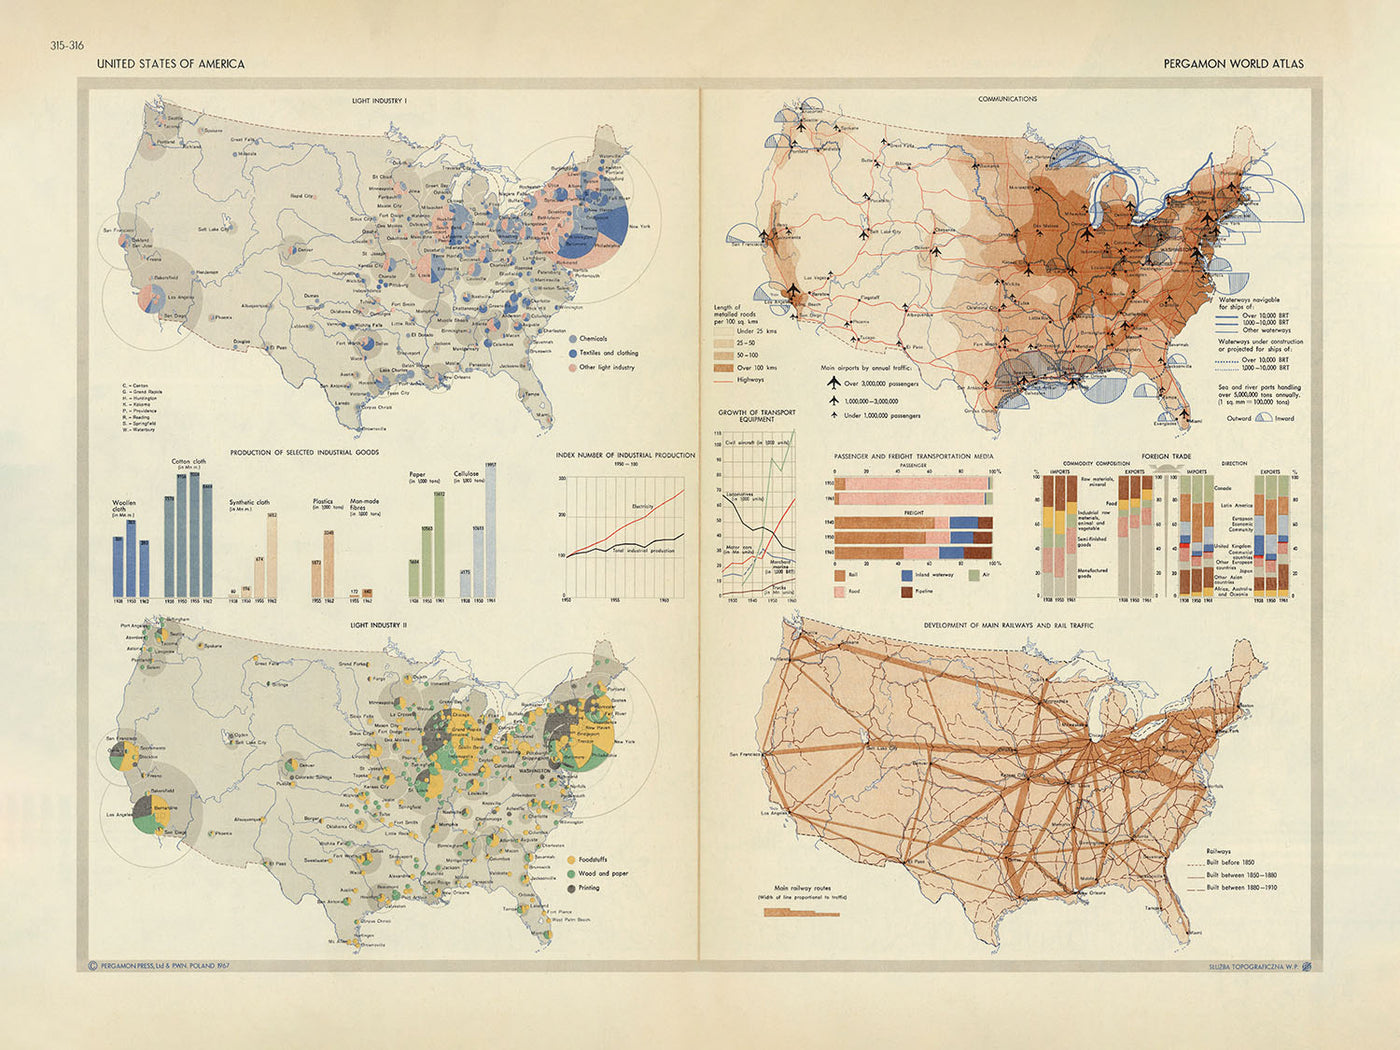 Infographic Map of the United States of America, 1967: Industrial Development, Transportation Infrastructure, Foreign Trade Dynamics